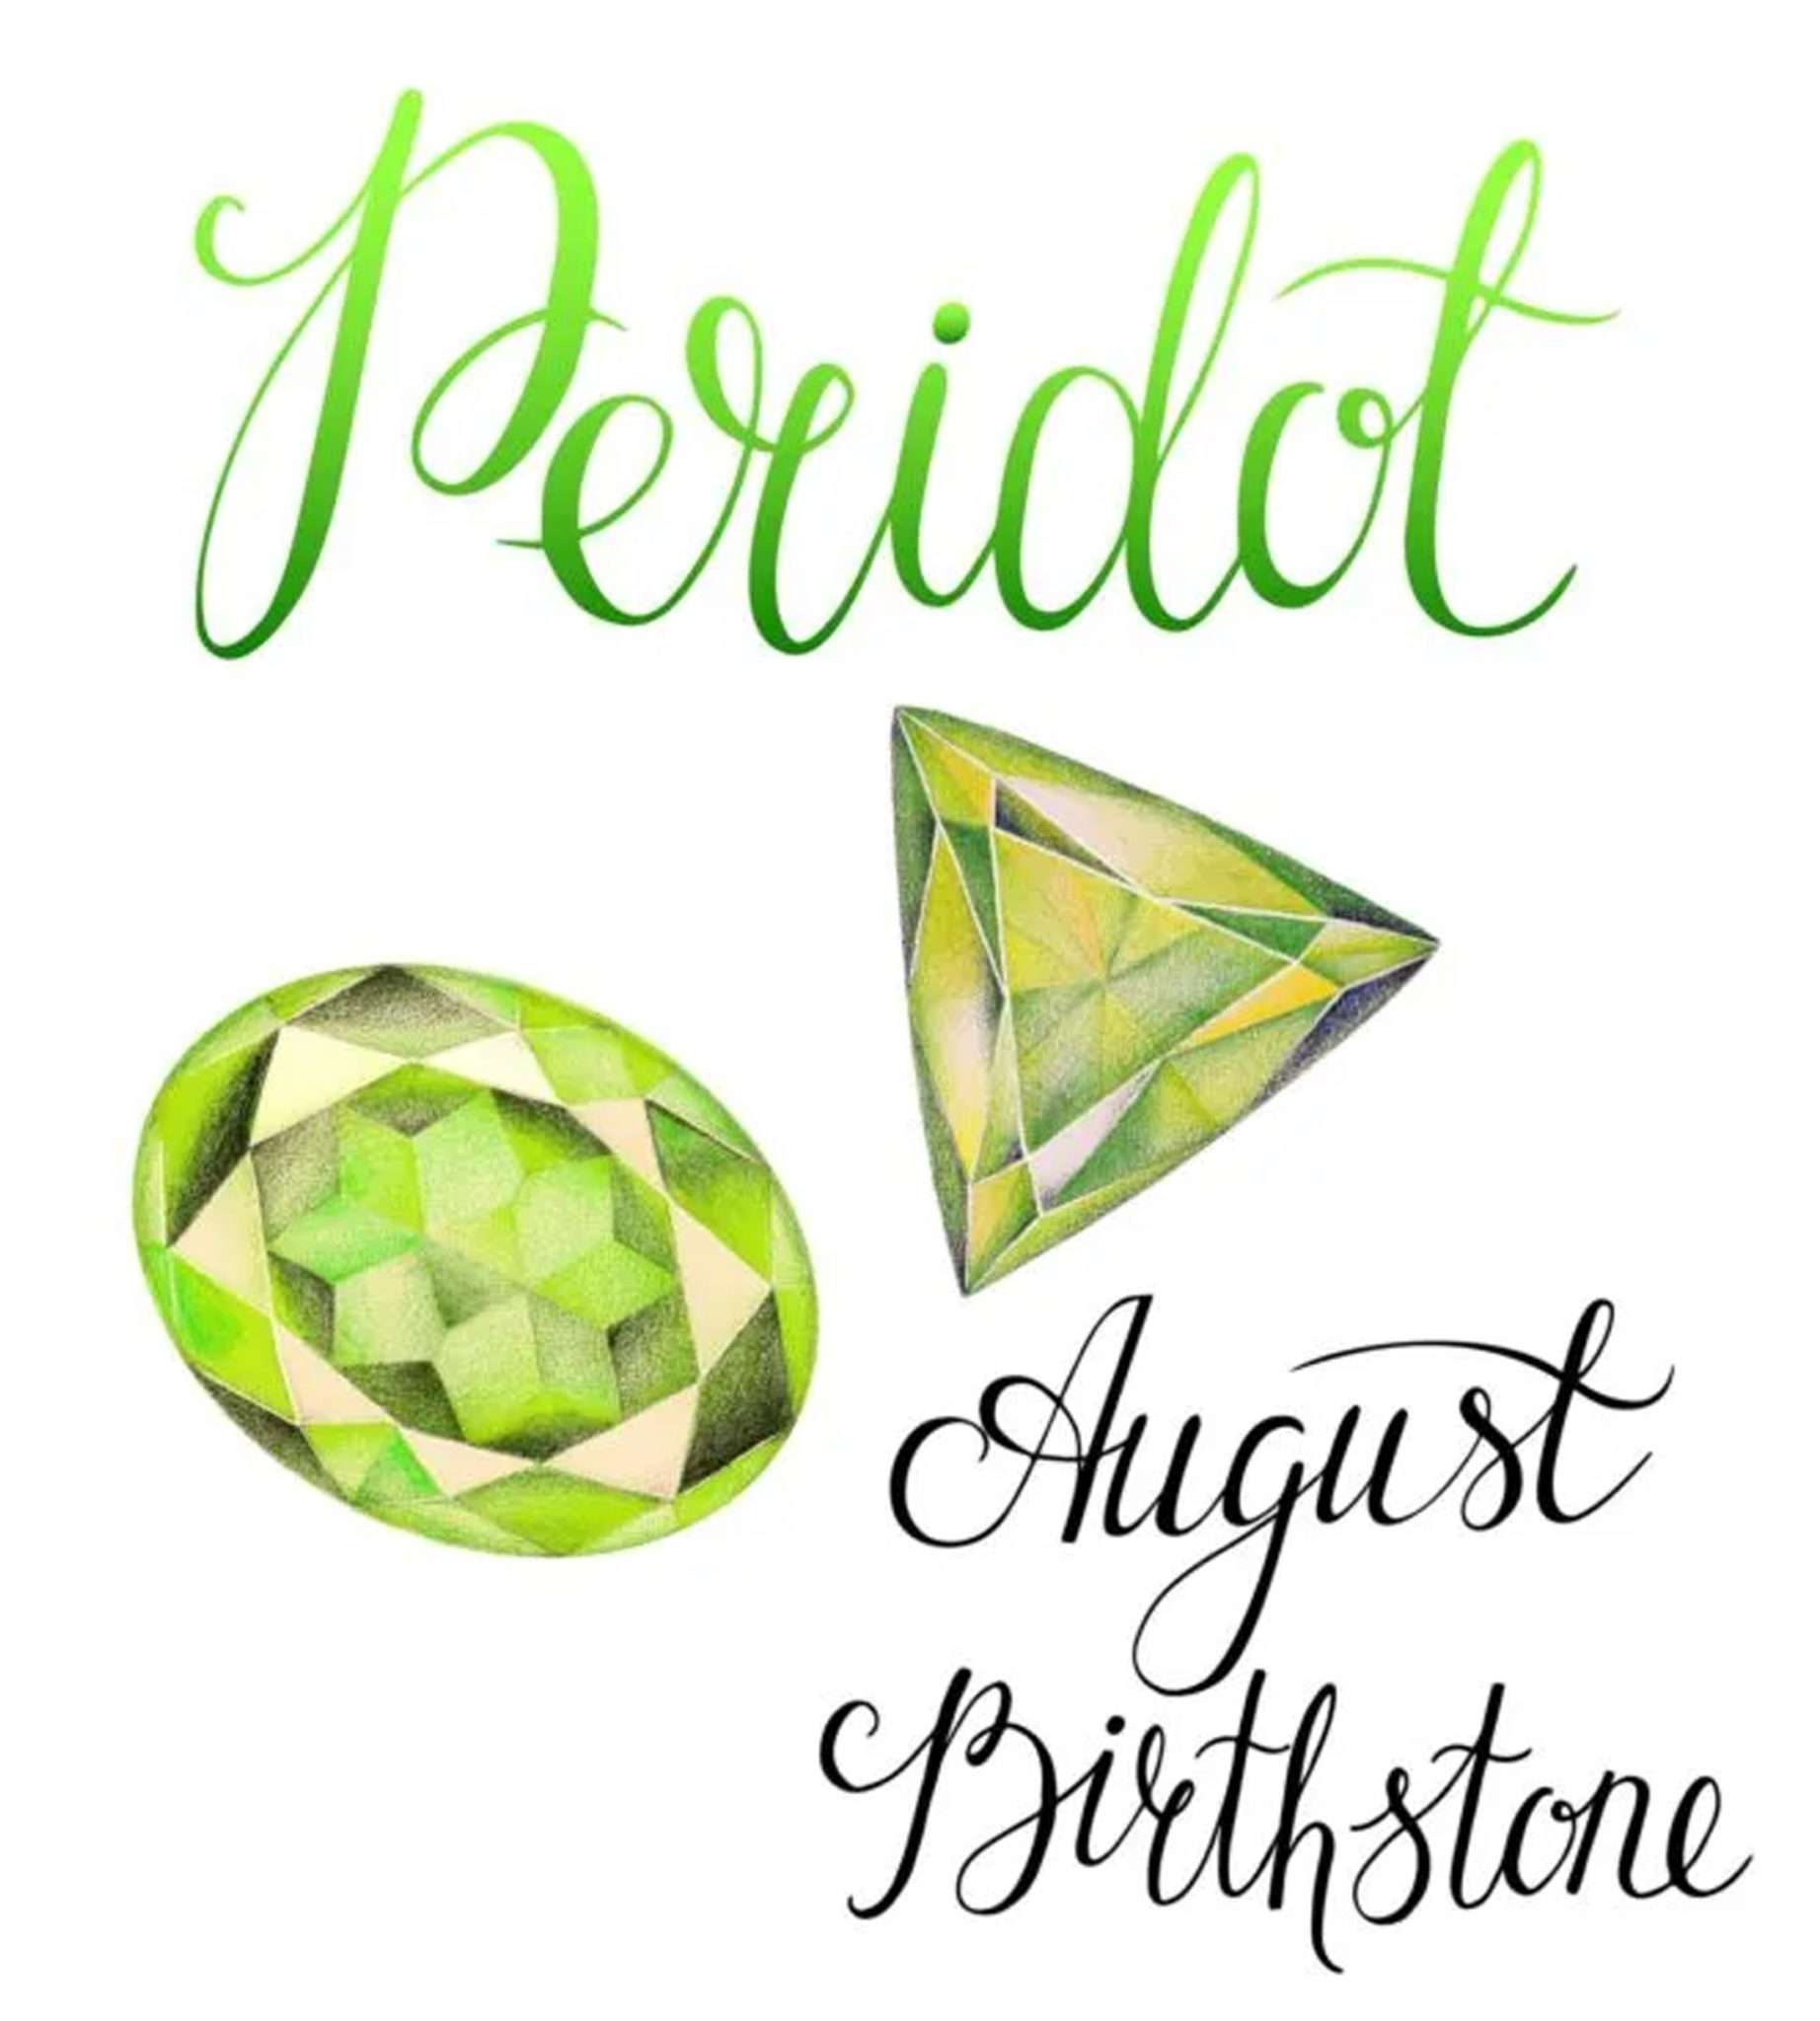 august-birthstone-color-and-meaning-fely-s-jewelry-and-pawnshop